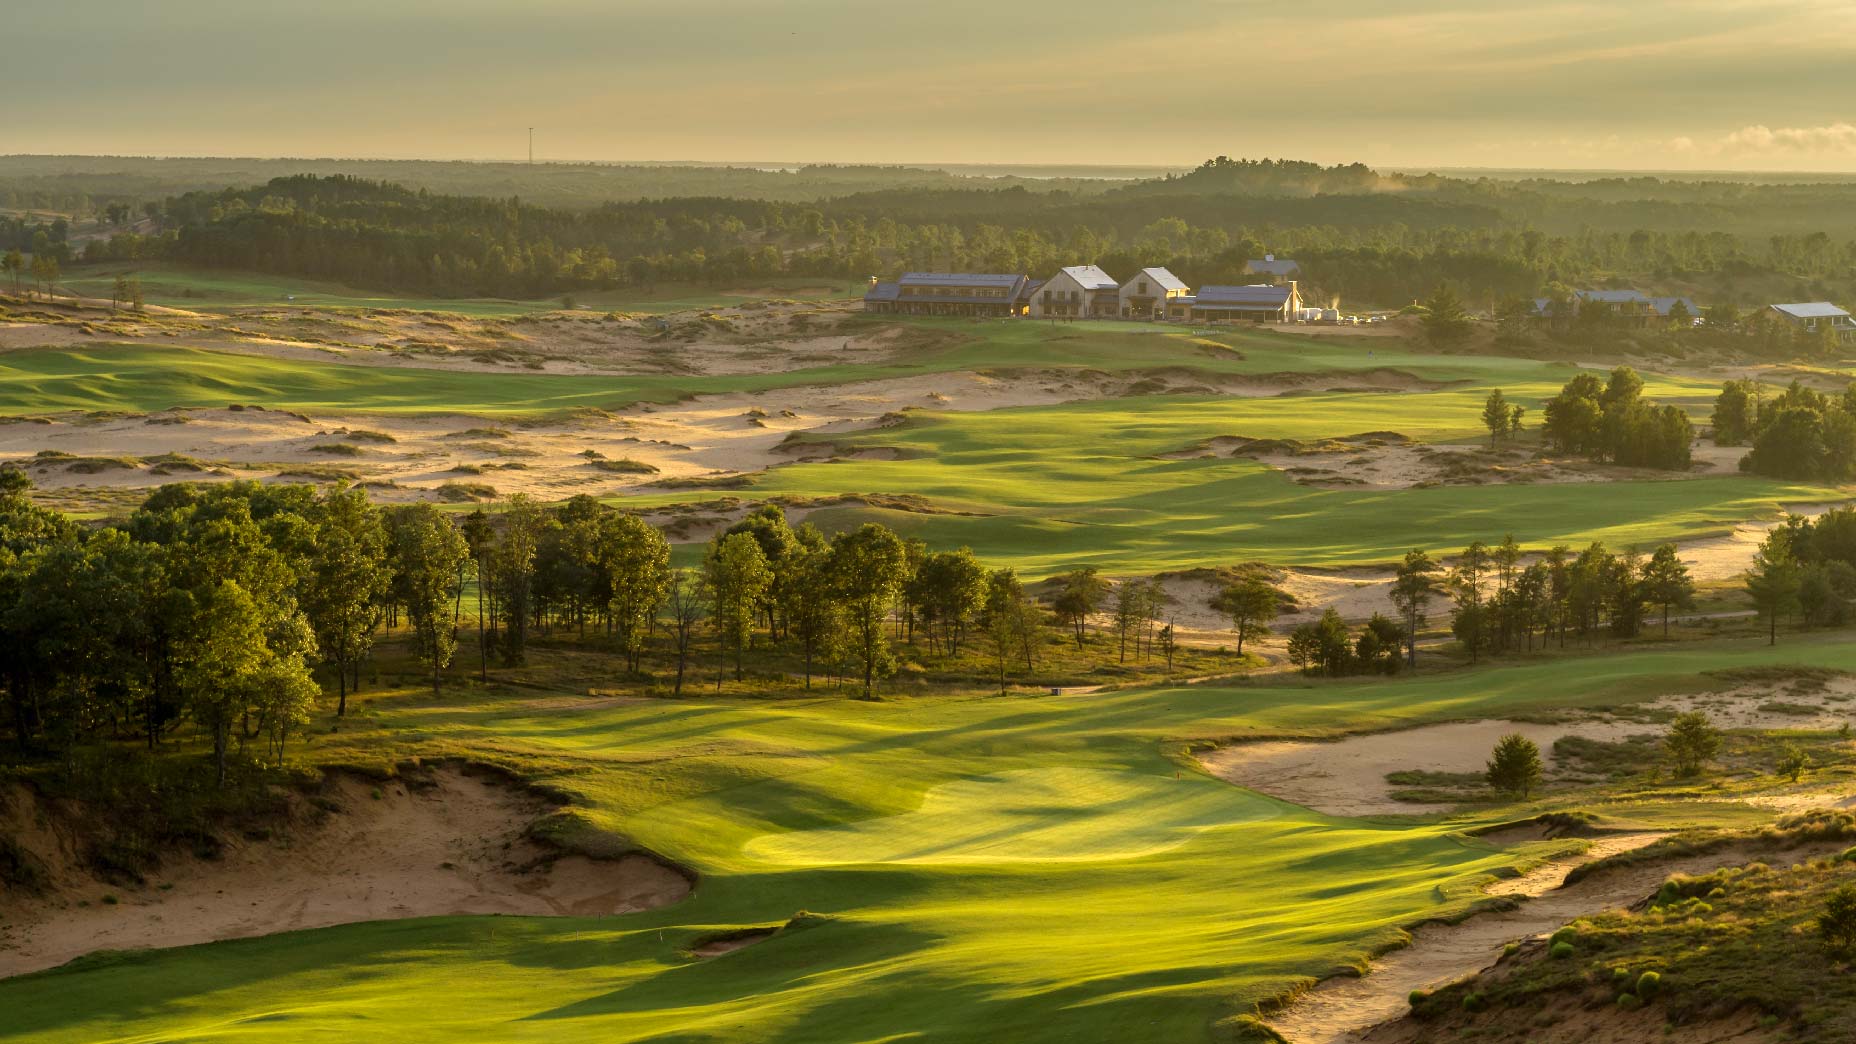 The Mammoth Dunes course at Sand Valley